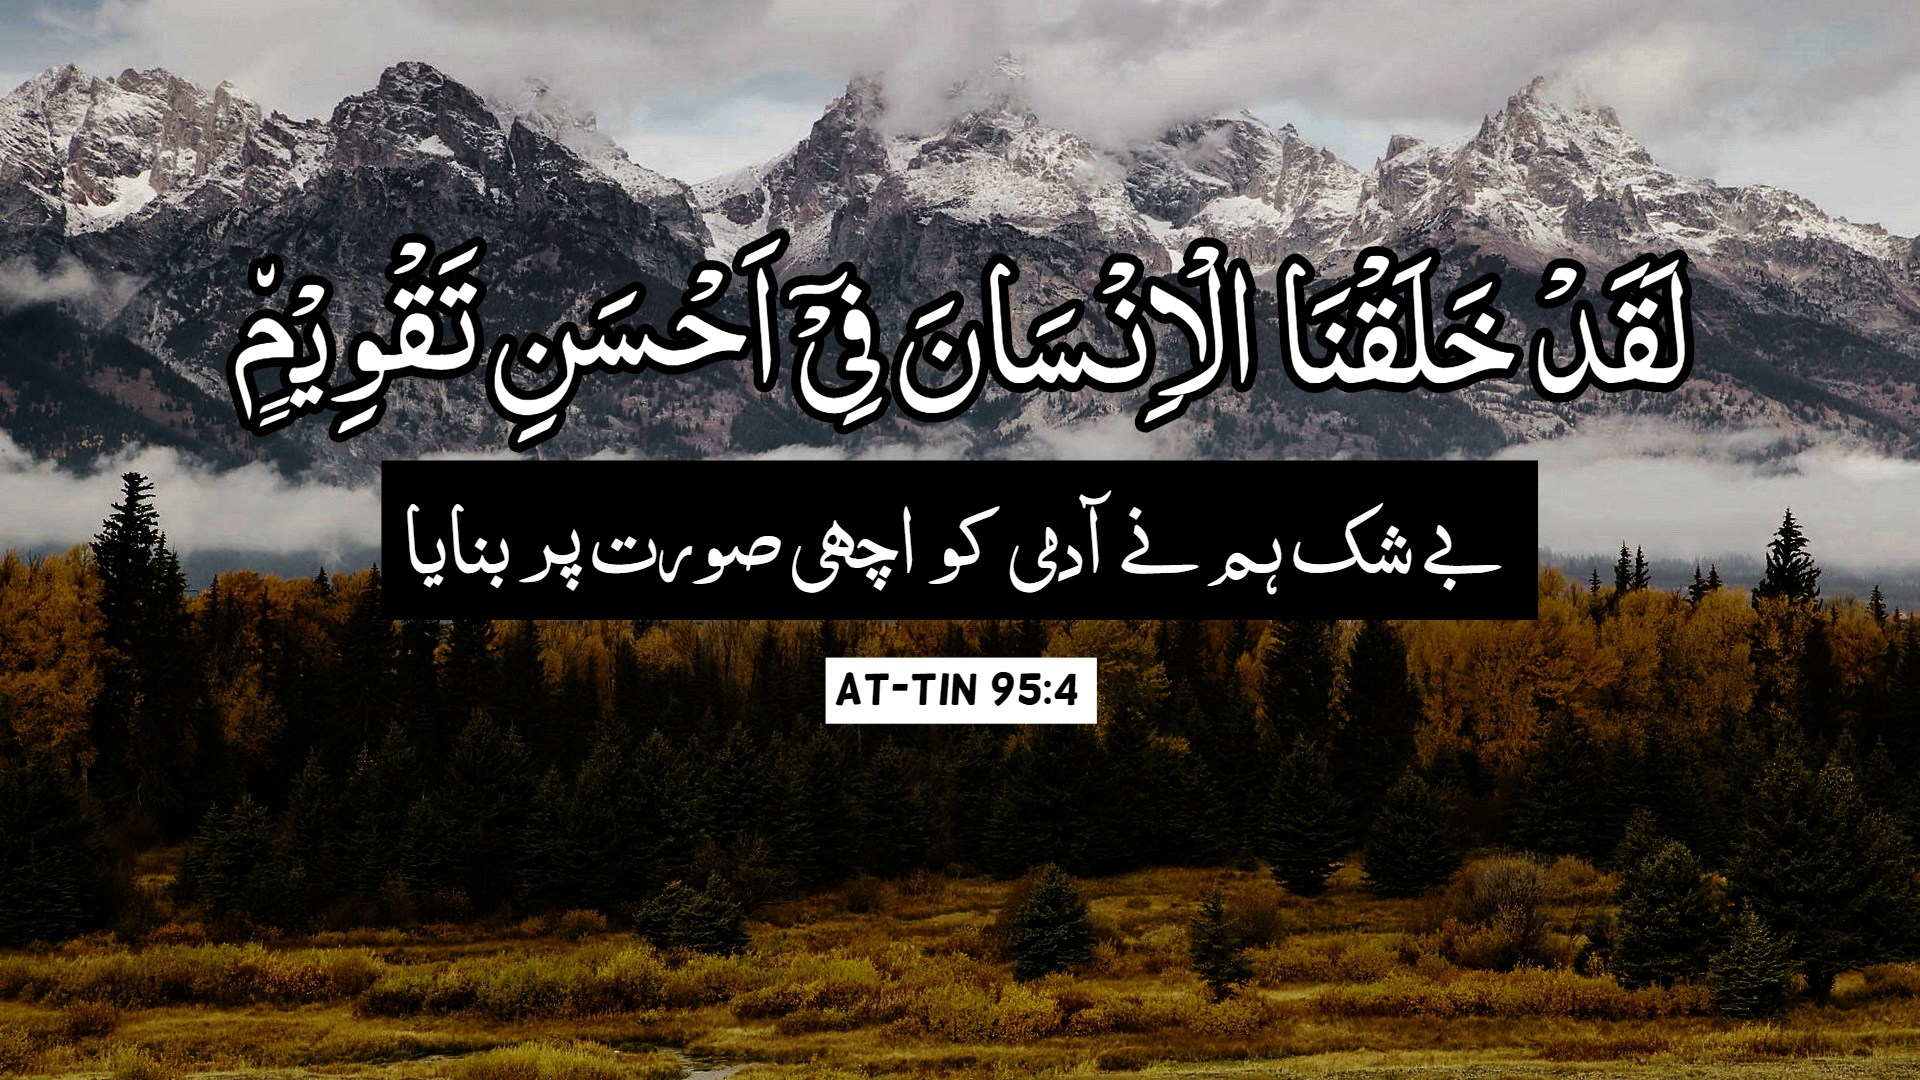 Islamic Quotes Urdu Free Download Best Islamic Quotes - Linkedin Background  Photo Mountain - 1920x1080 Wallpaper 